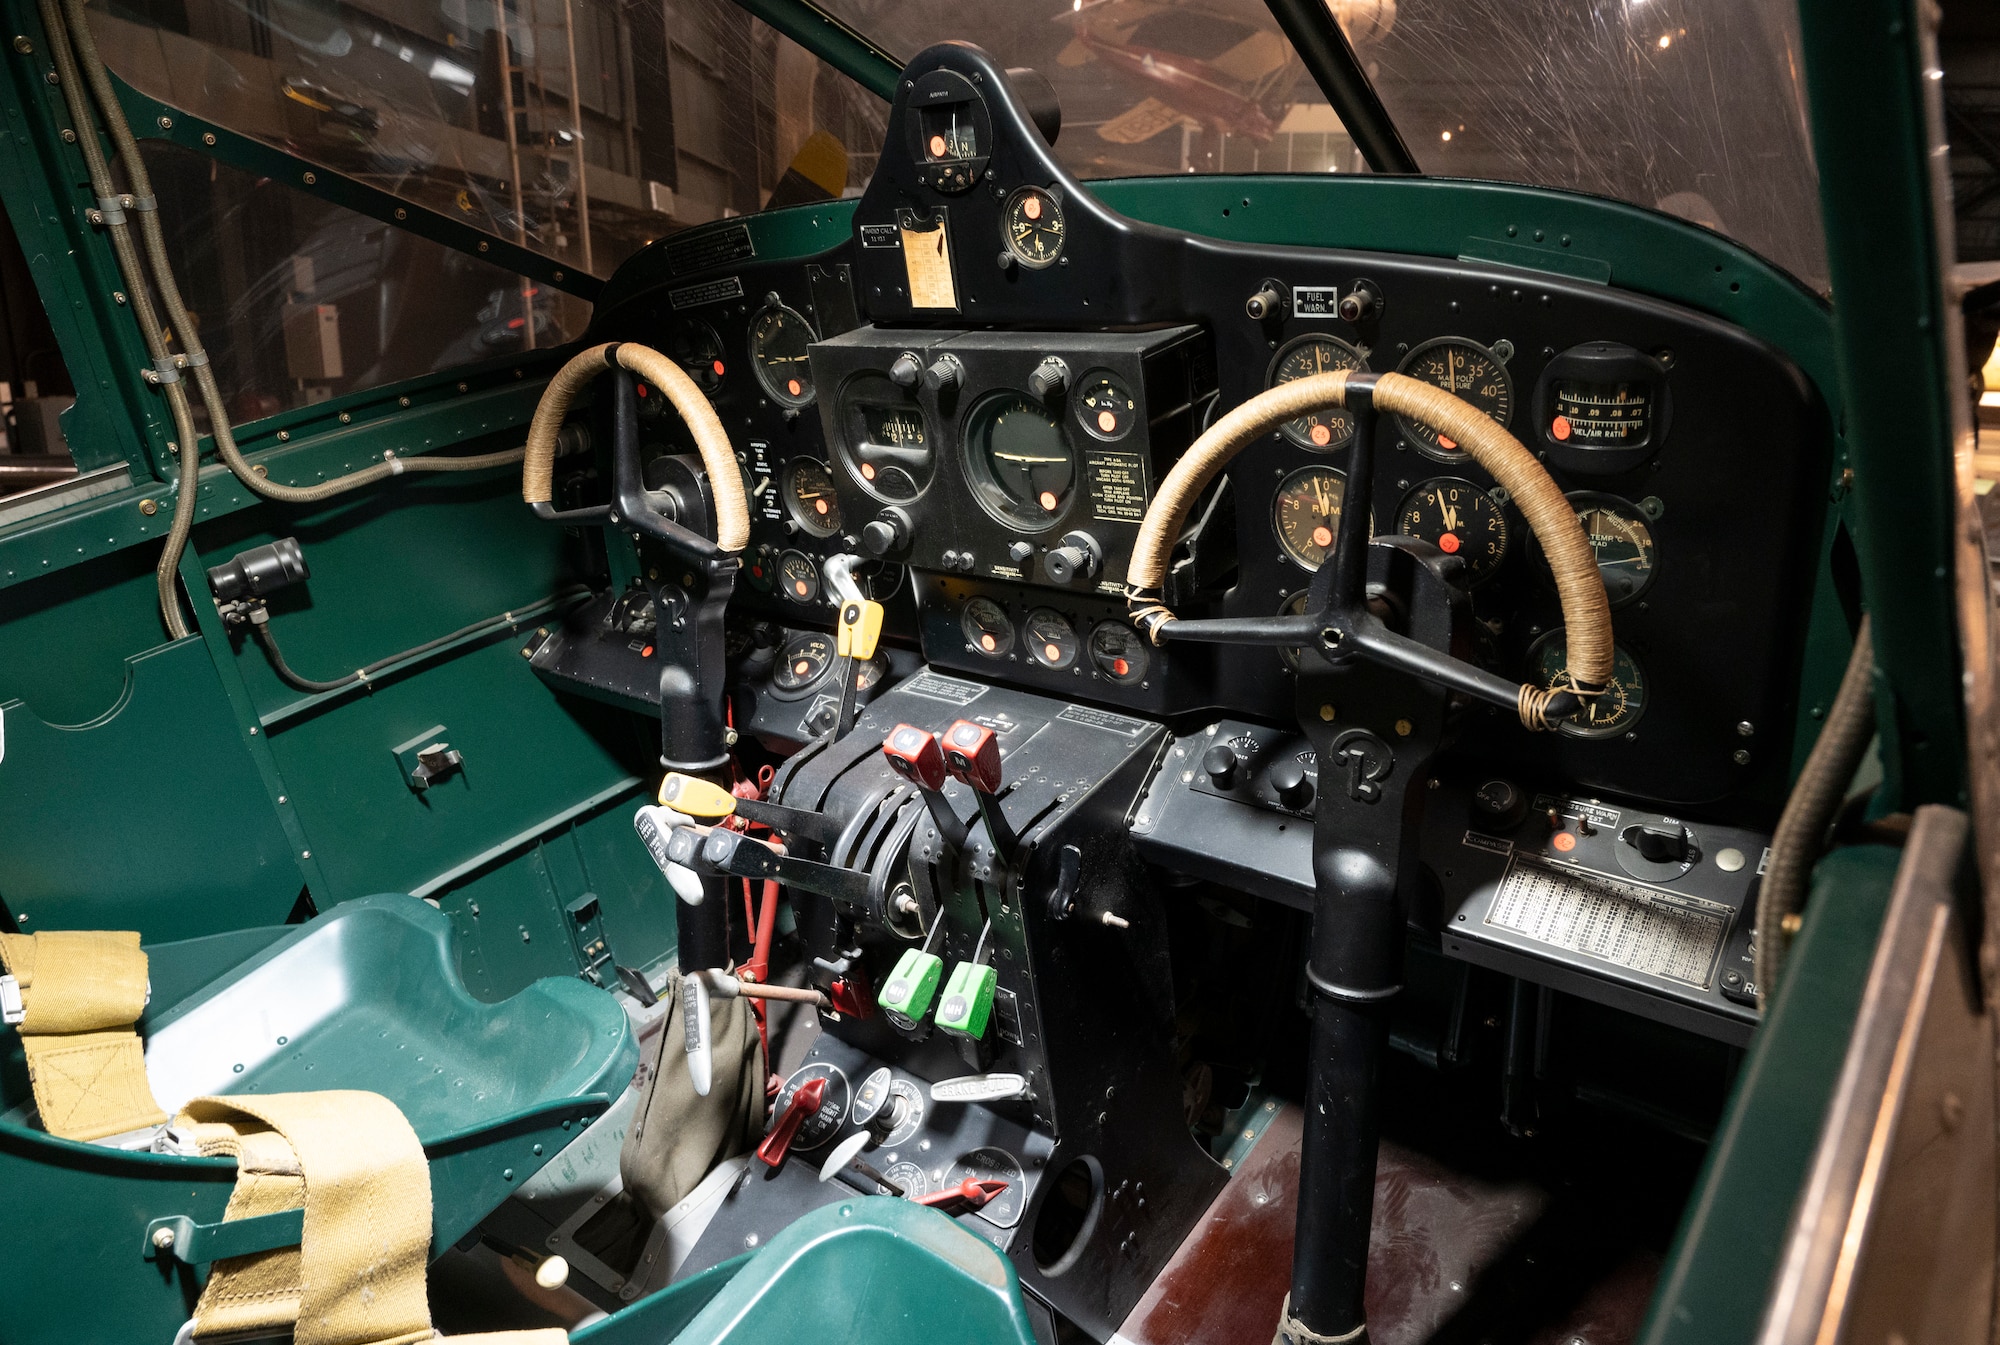 Interior view of the Beech AT-10 Wichita cockpit at the National Museum of the U.S. Air Force World War II Gallery.